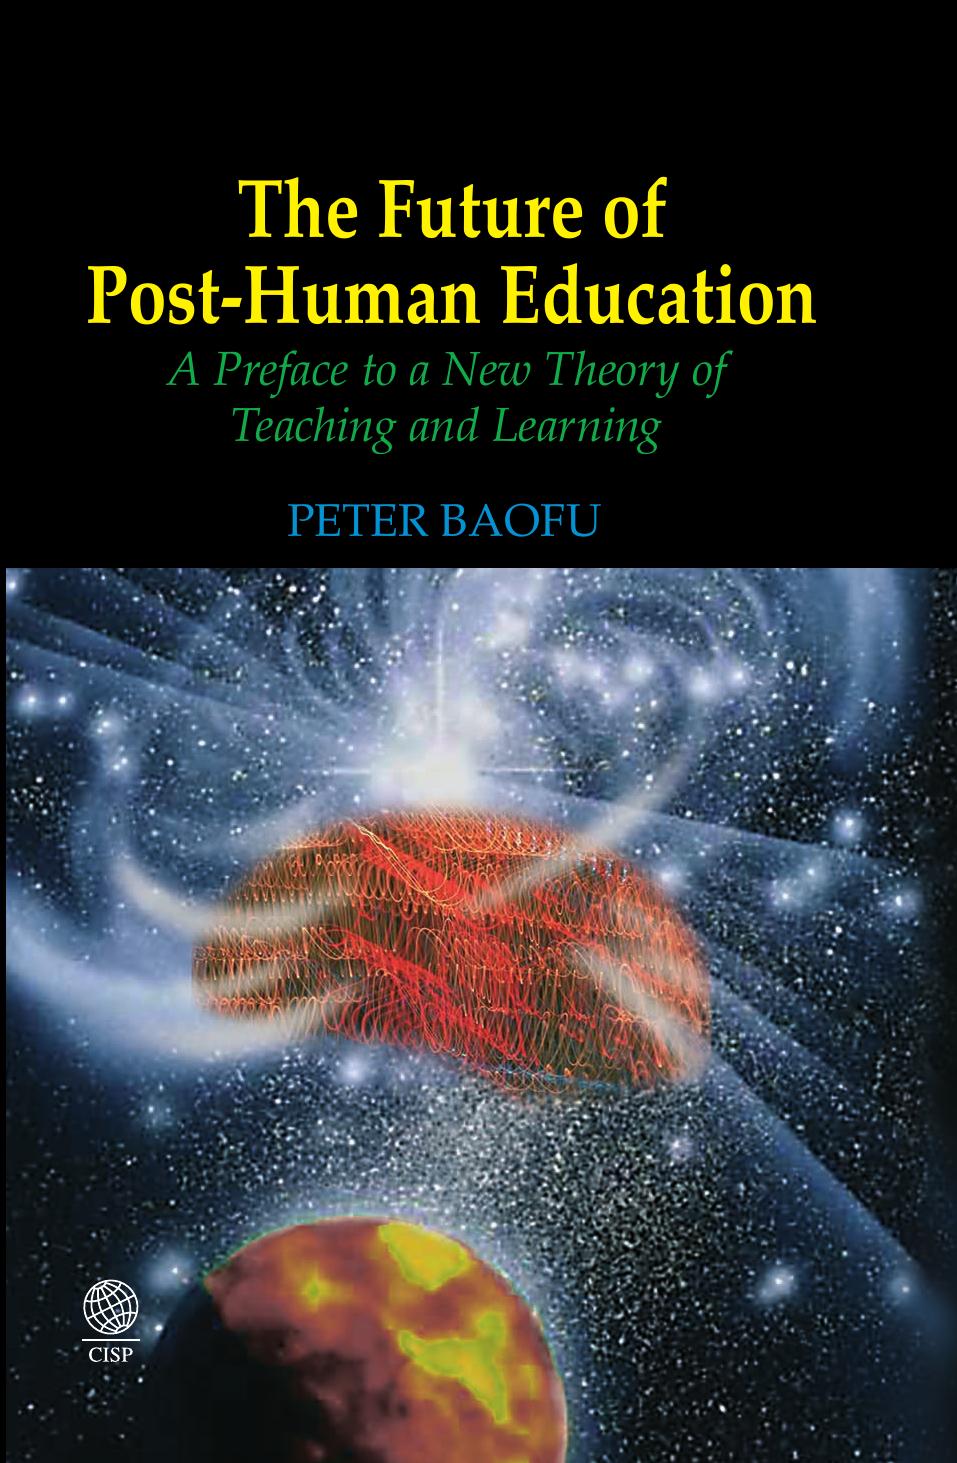 The Future of Post-Human Education: A Preface to a New Theory of Teaching and Learning